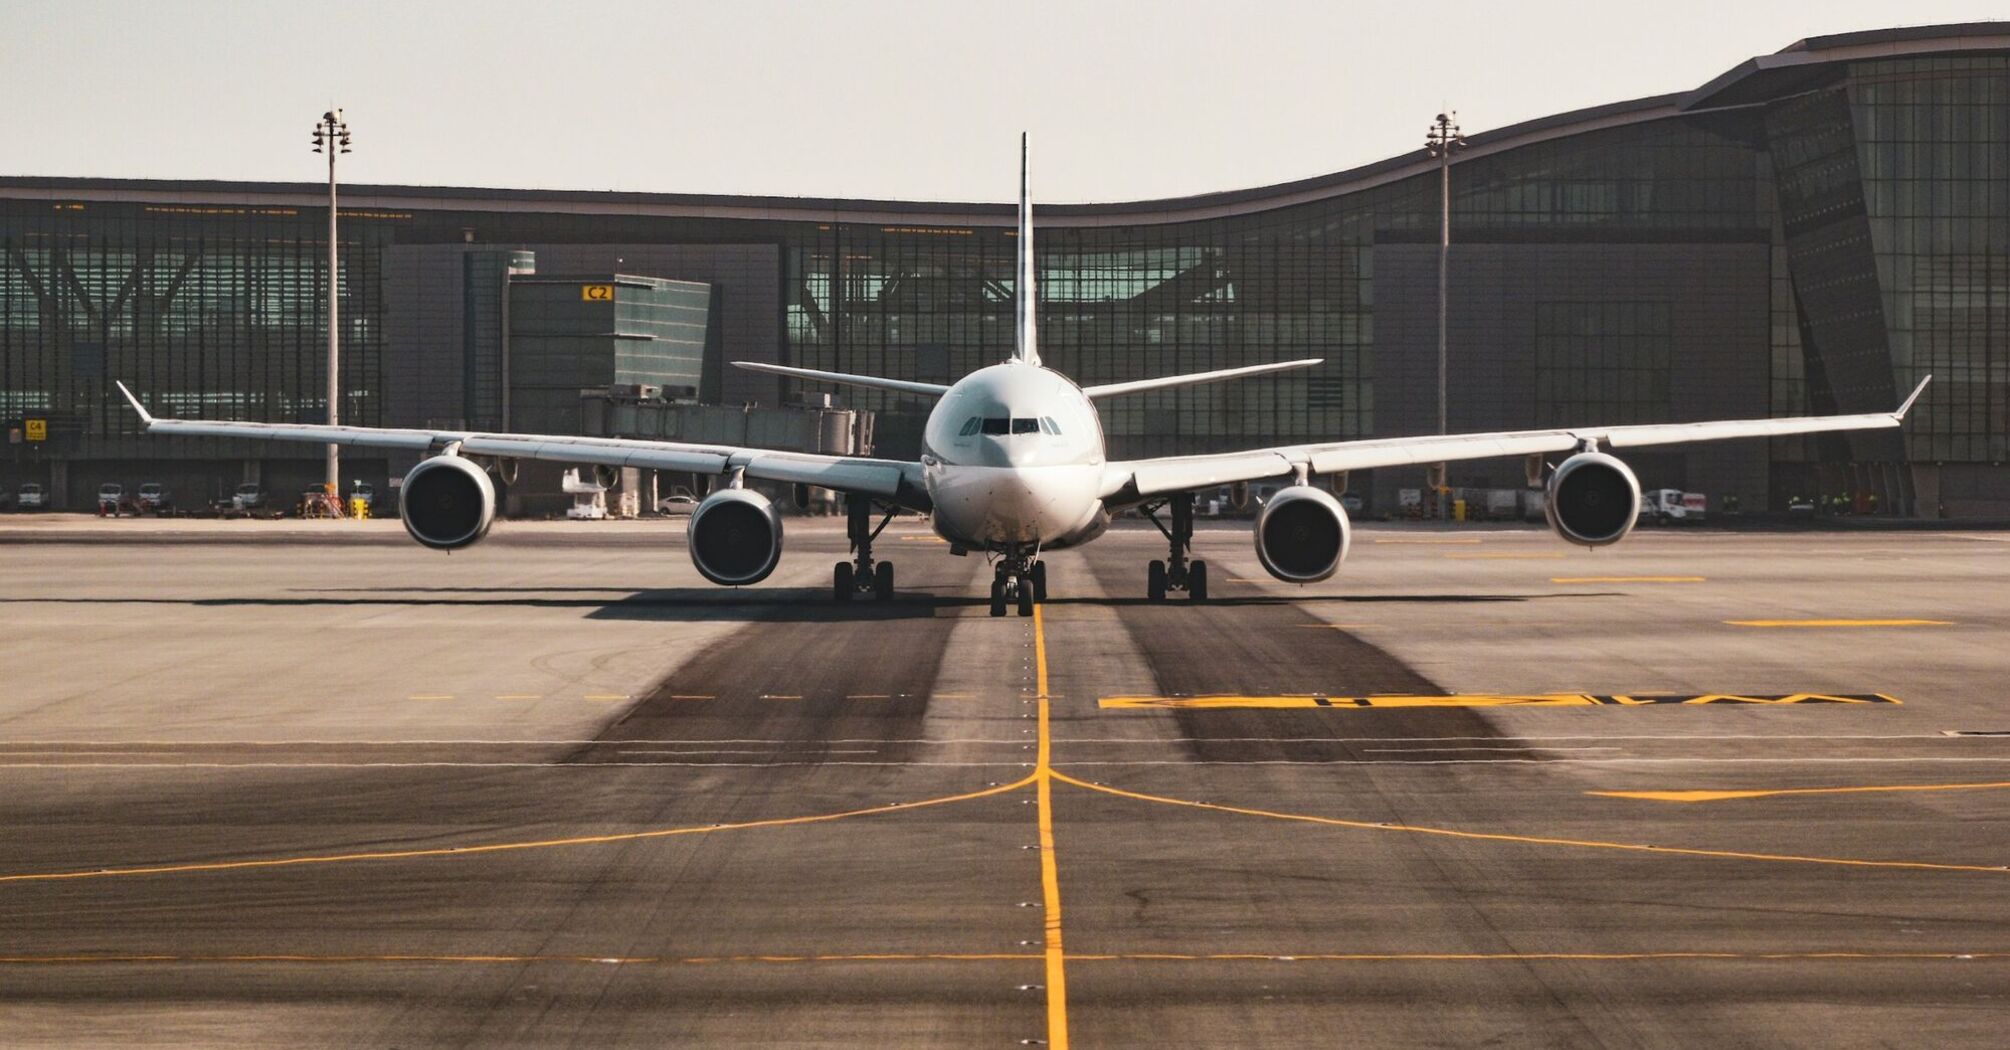 Passenger airplane on the runway at an airport